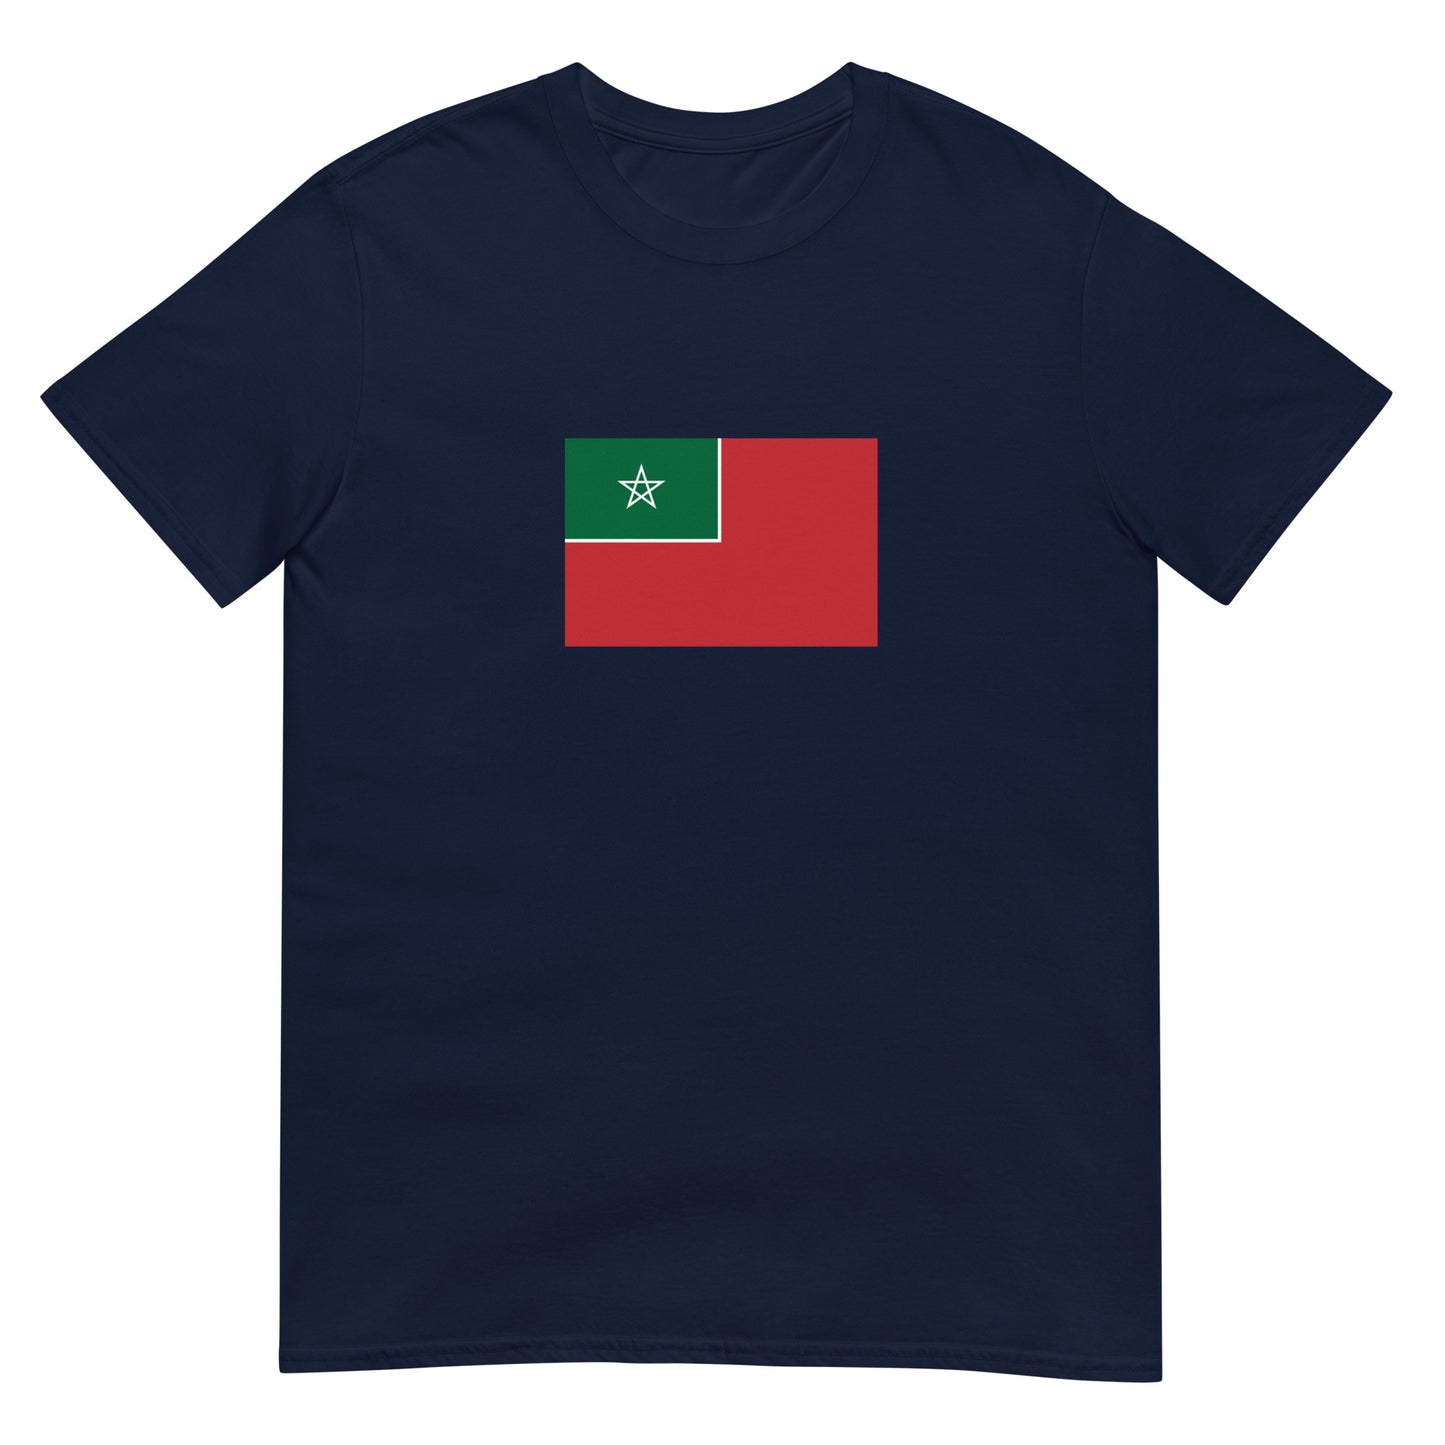 Morocco - Spanish Protectorate in Morocco (1912-1956) | Historical Flag Short-Sleeve Unisex T-Shirt